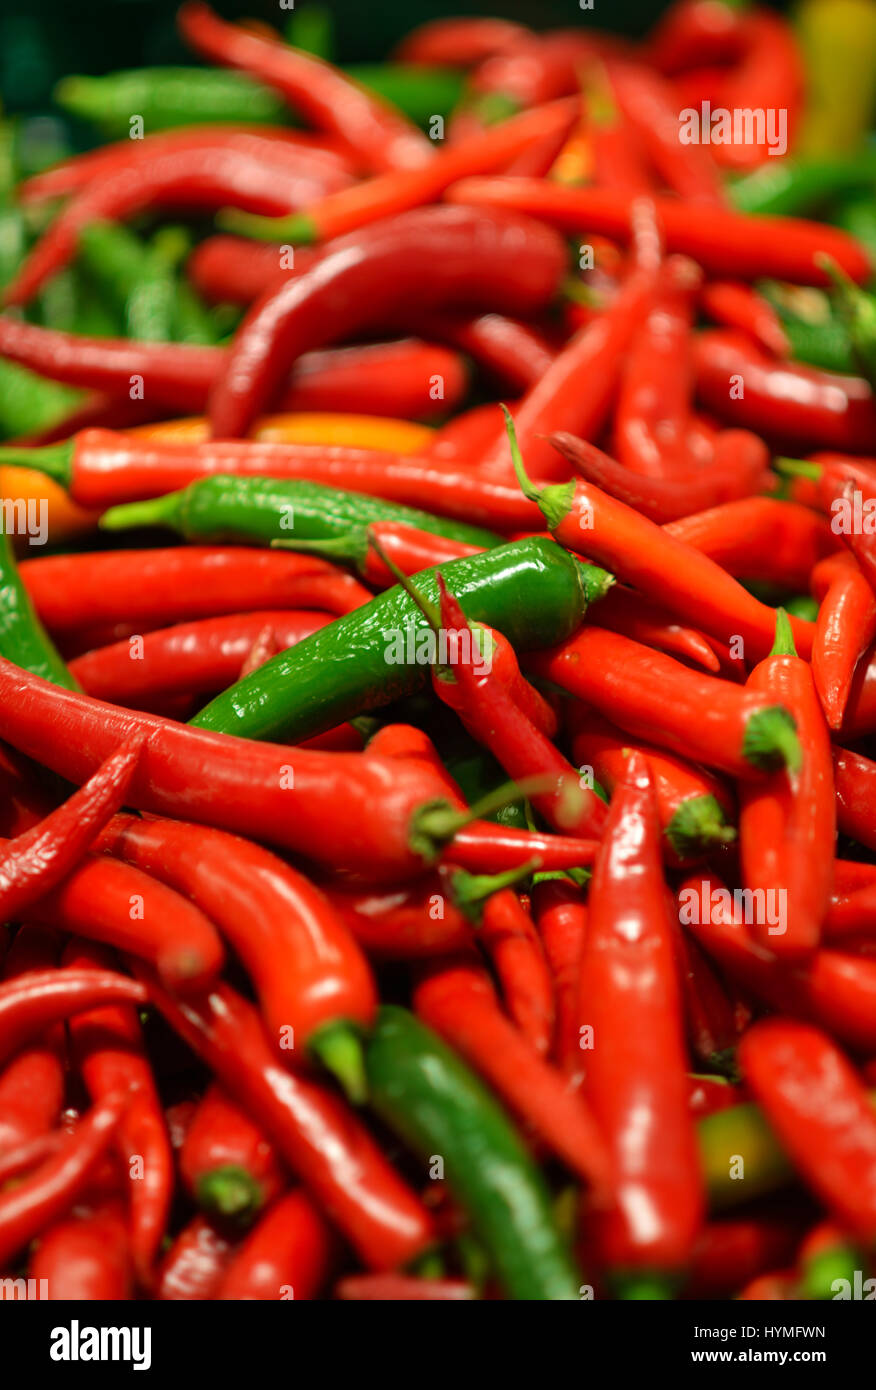 Red and green chili peppers at the background Stock Photo